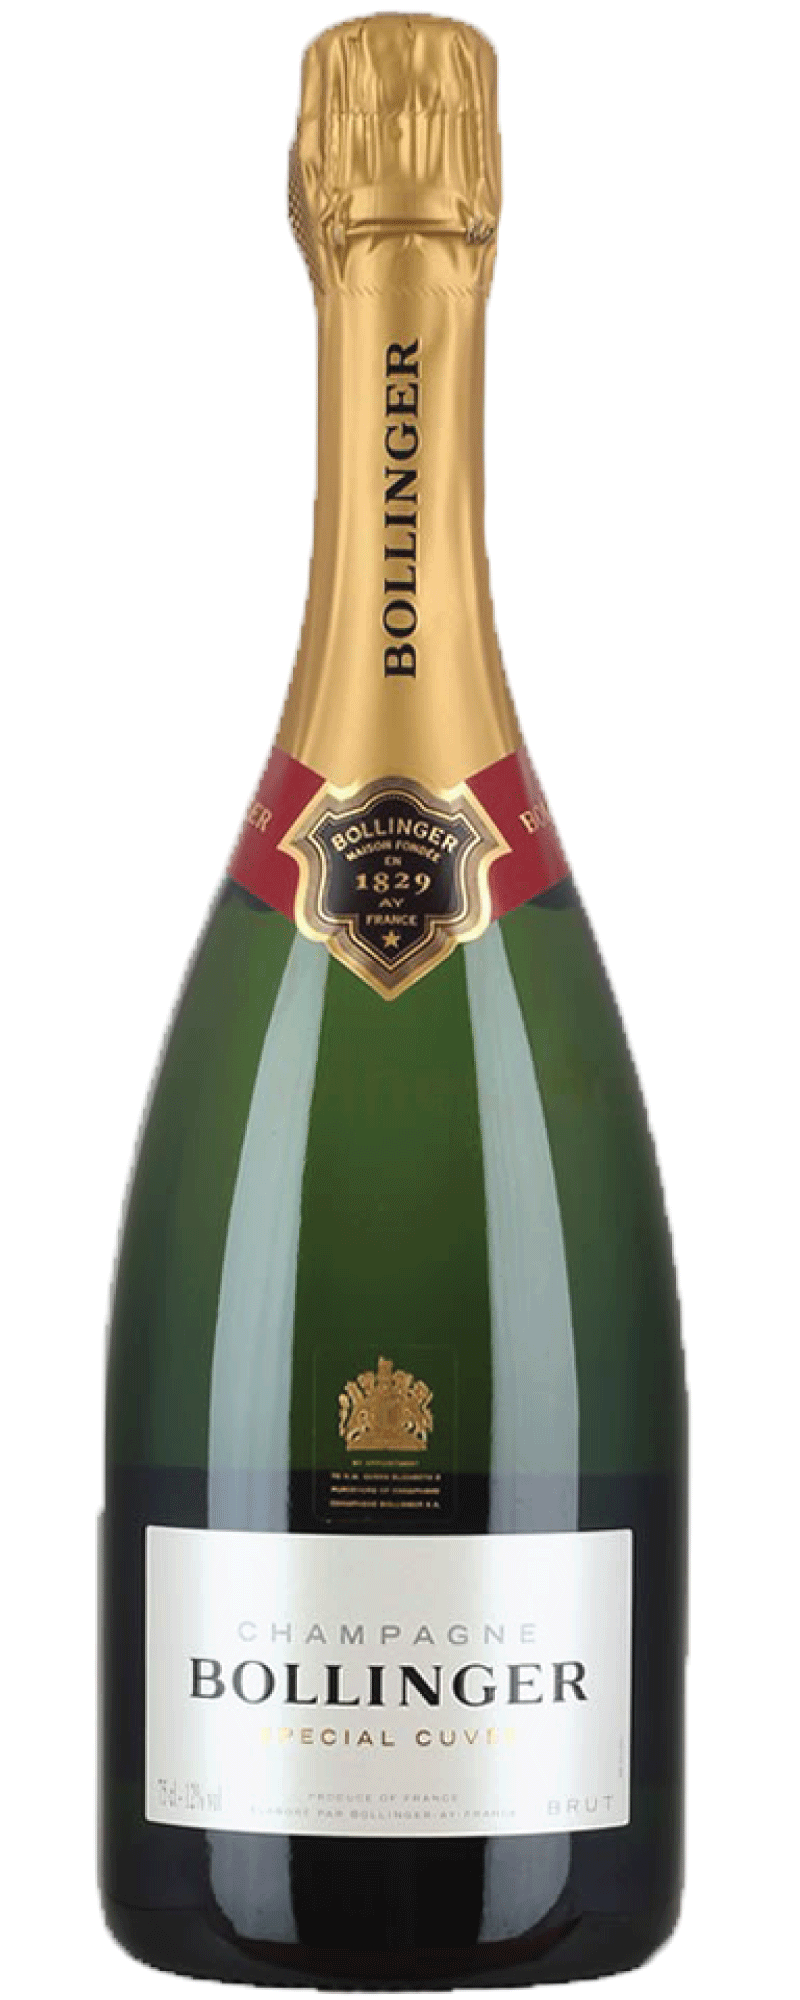 Bollinger - Champagne Special Cuvee / NV / 750mL